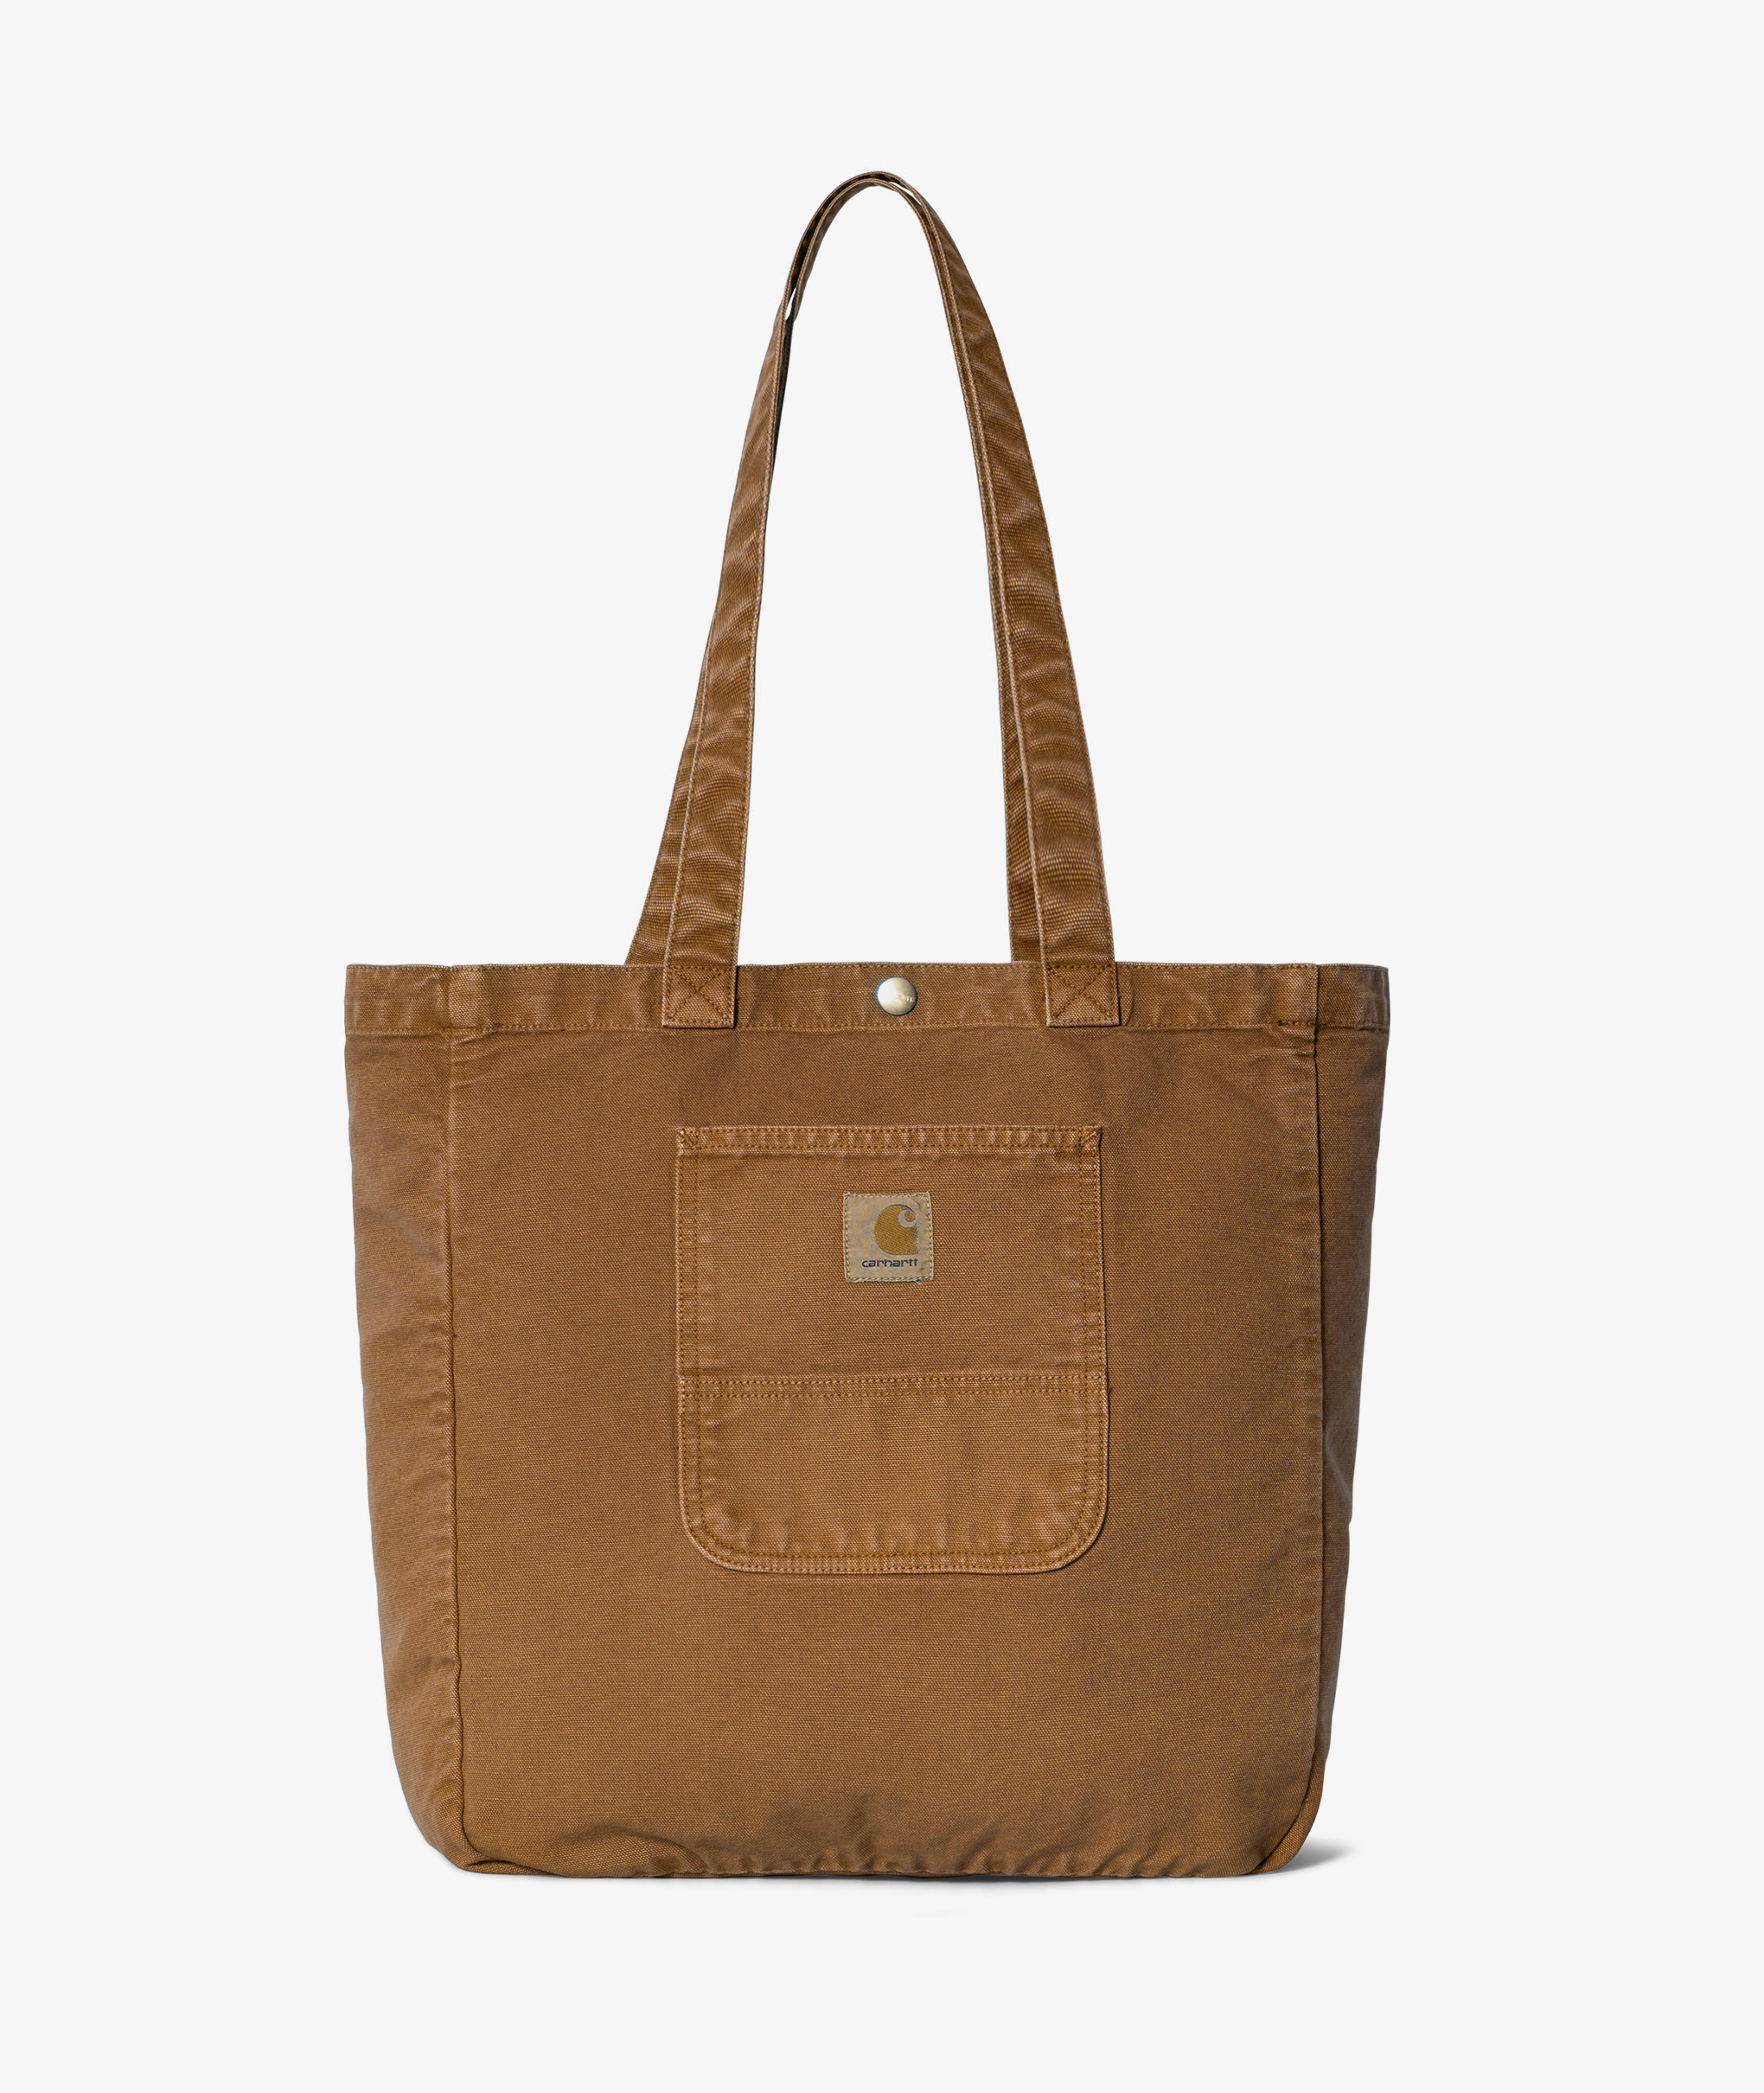 Norse Store | Shipping Worldwide - Carhartt WIP Bayfield Tote - Tamarind